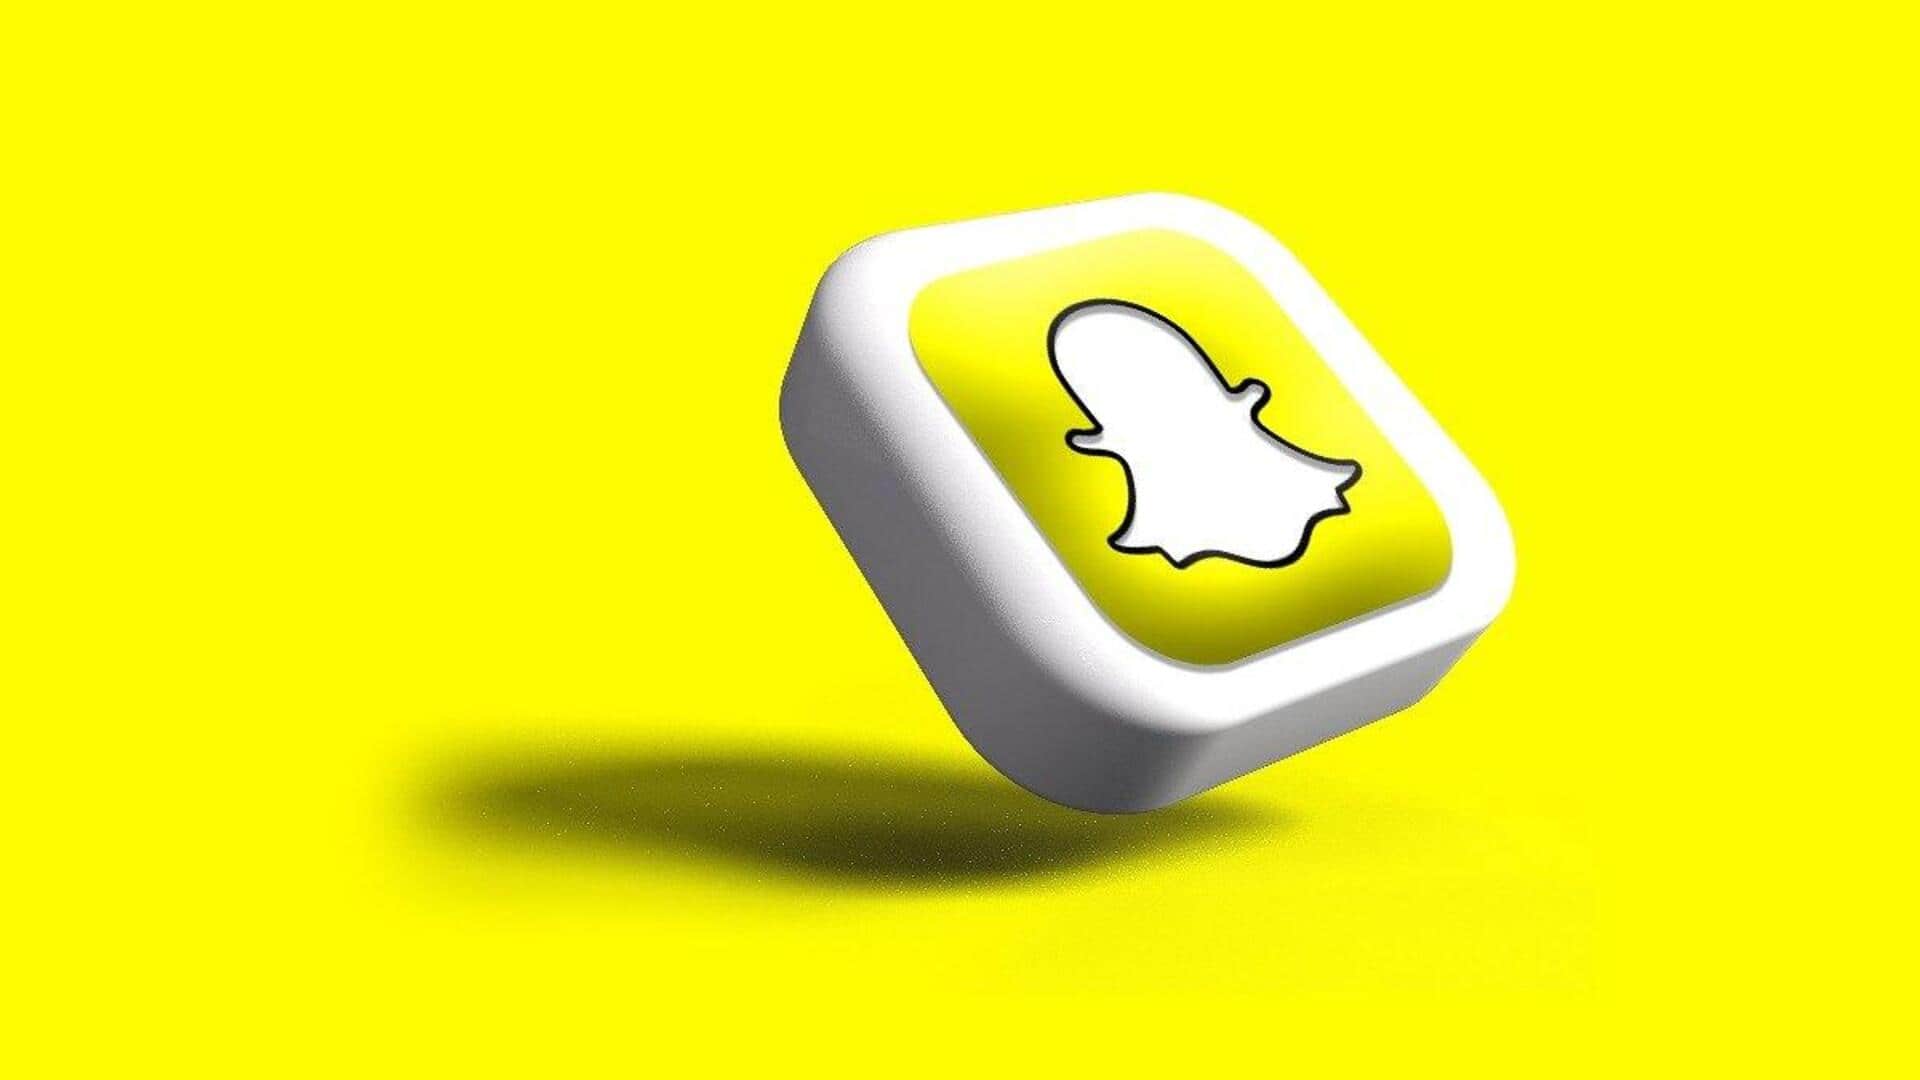 Snap to lay off 10% of staff amid revenue struggles